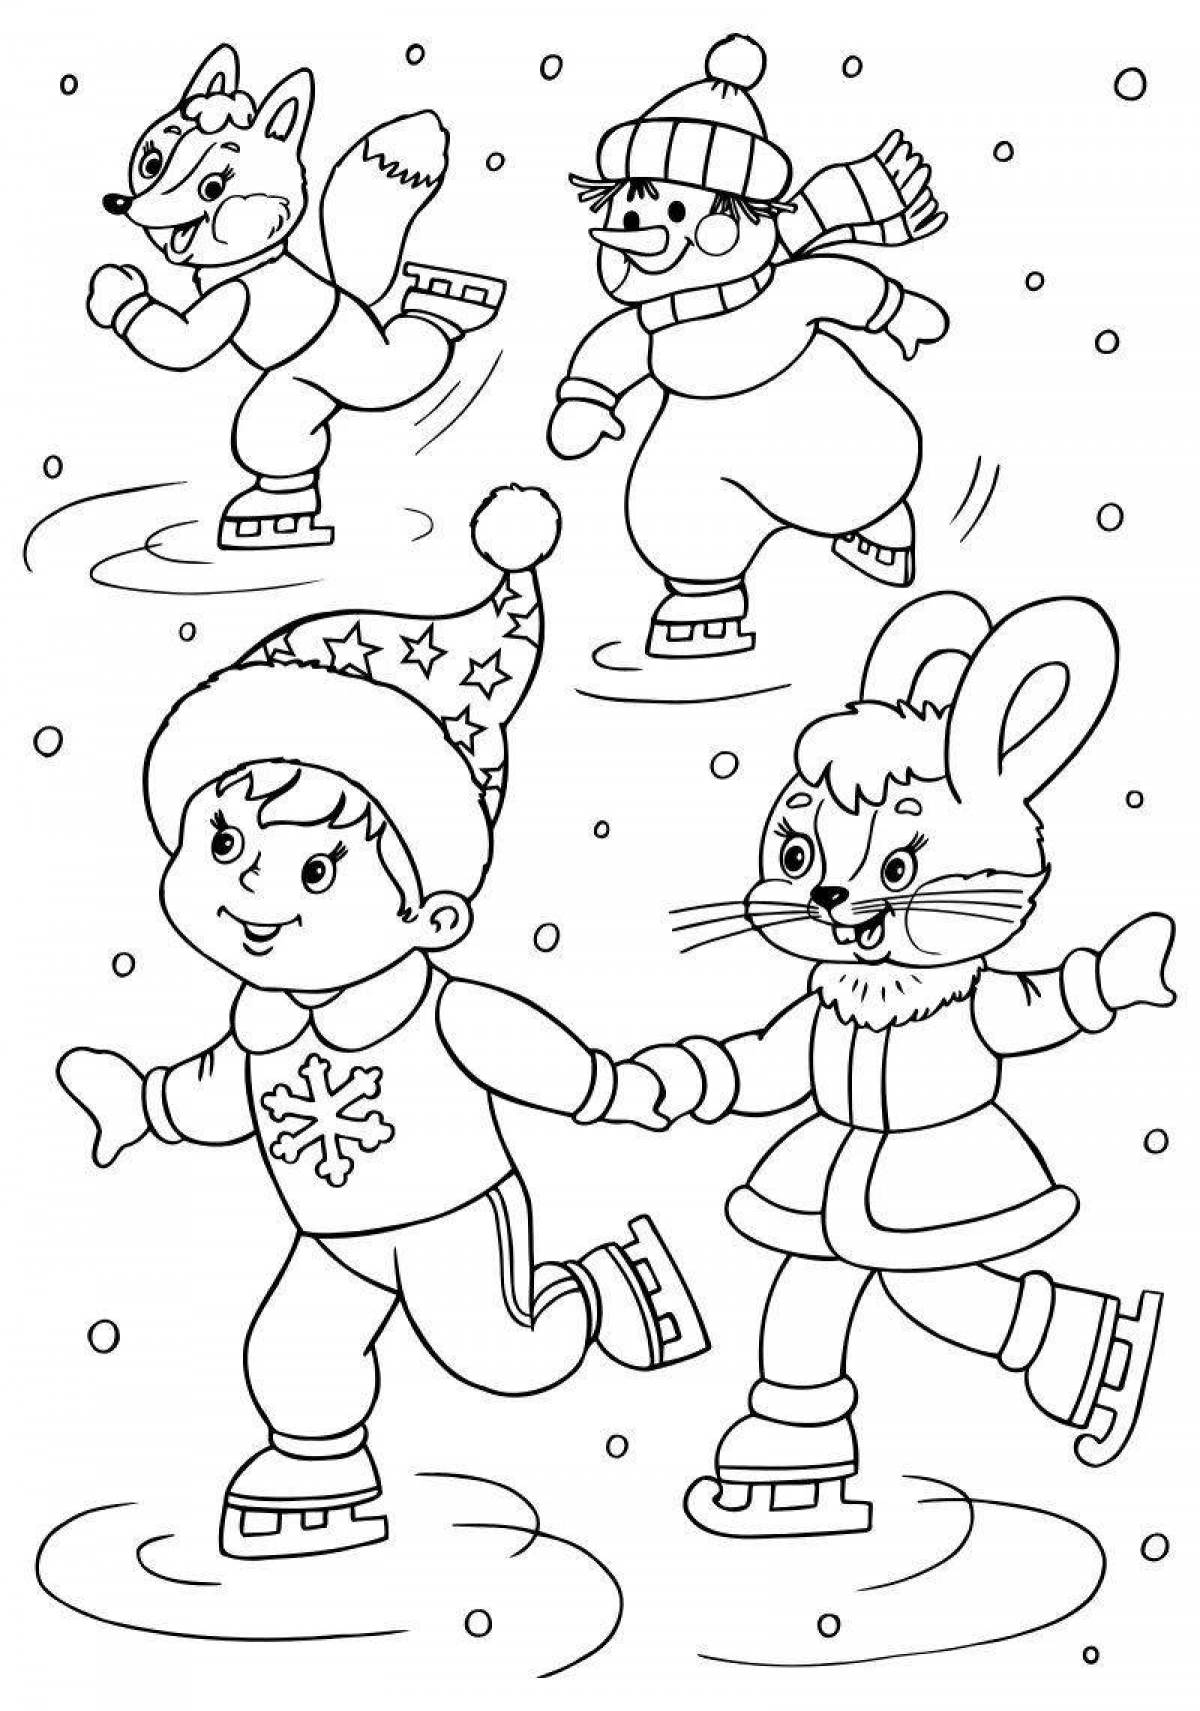 Live coloring winter for children 4 years old